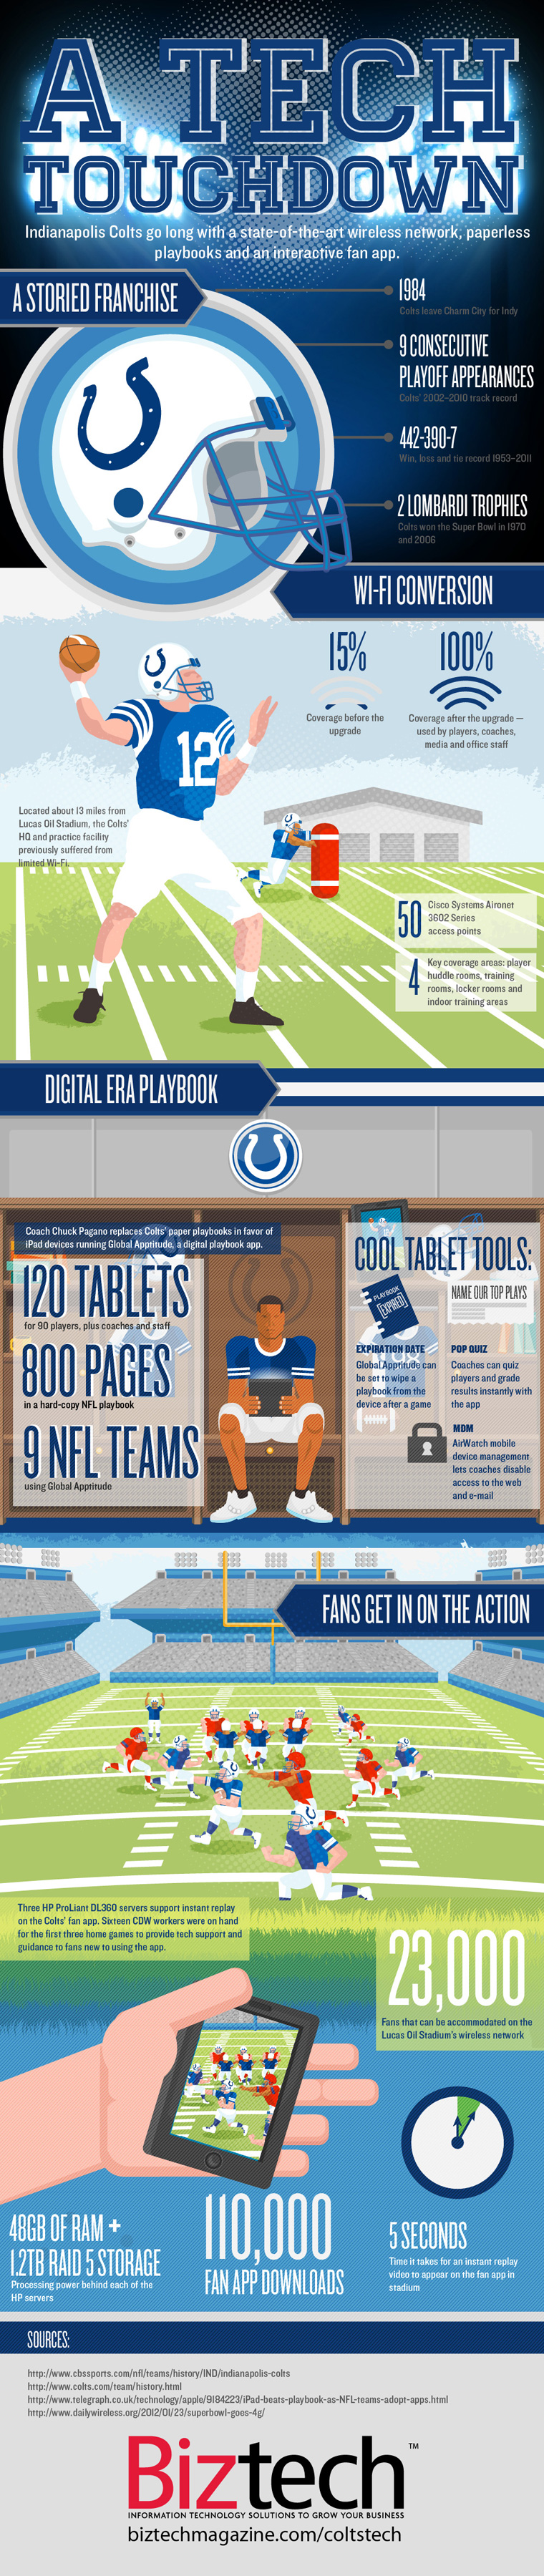 Indianapolis Colts Technology infographic